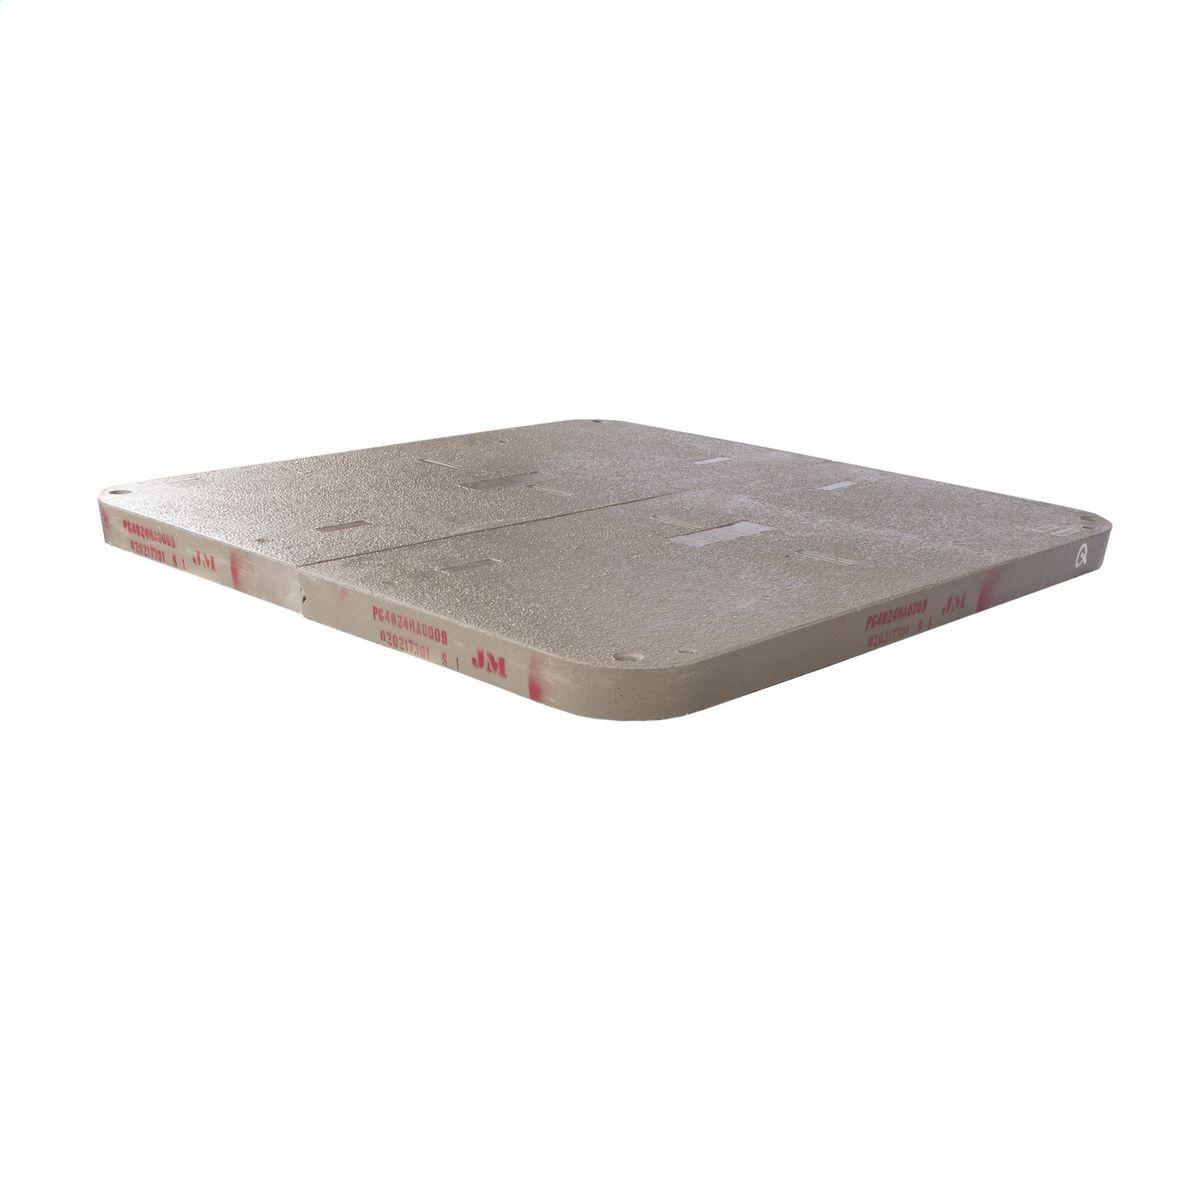 Hubbell PG3660HH0009 Cover, Polymer Concrete, Extra Heavy Duty Tier 22, 36"x60"x3", 2-piece w/ 2 Bolts, Blank Logo 